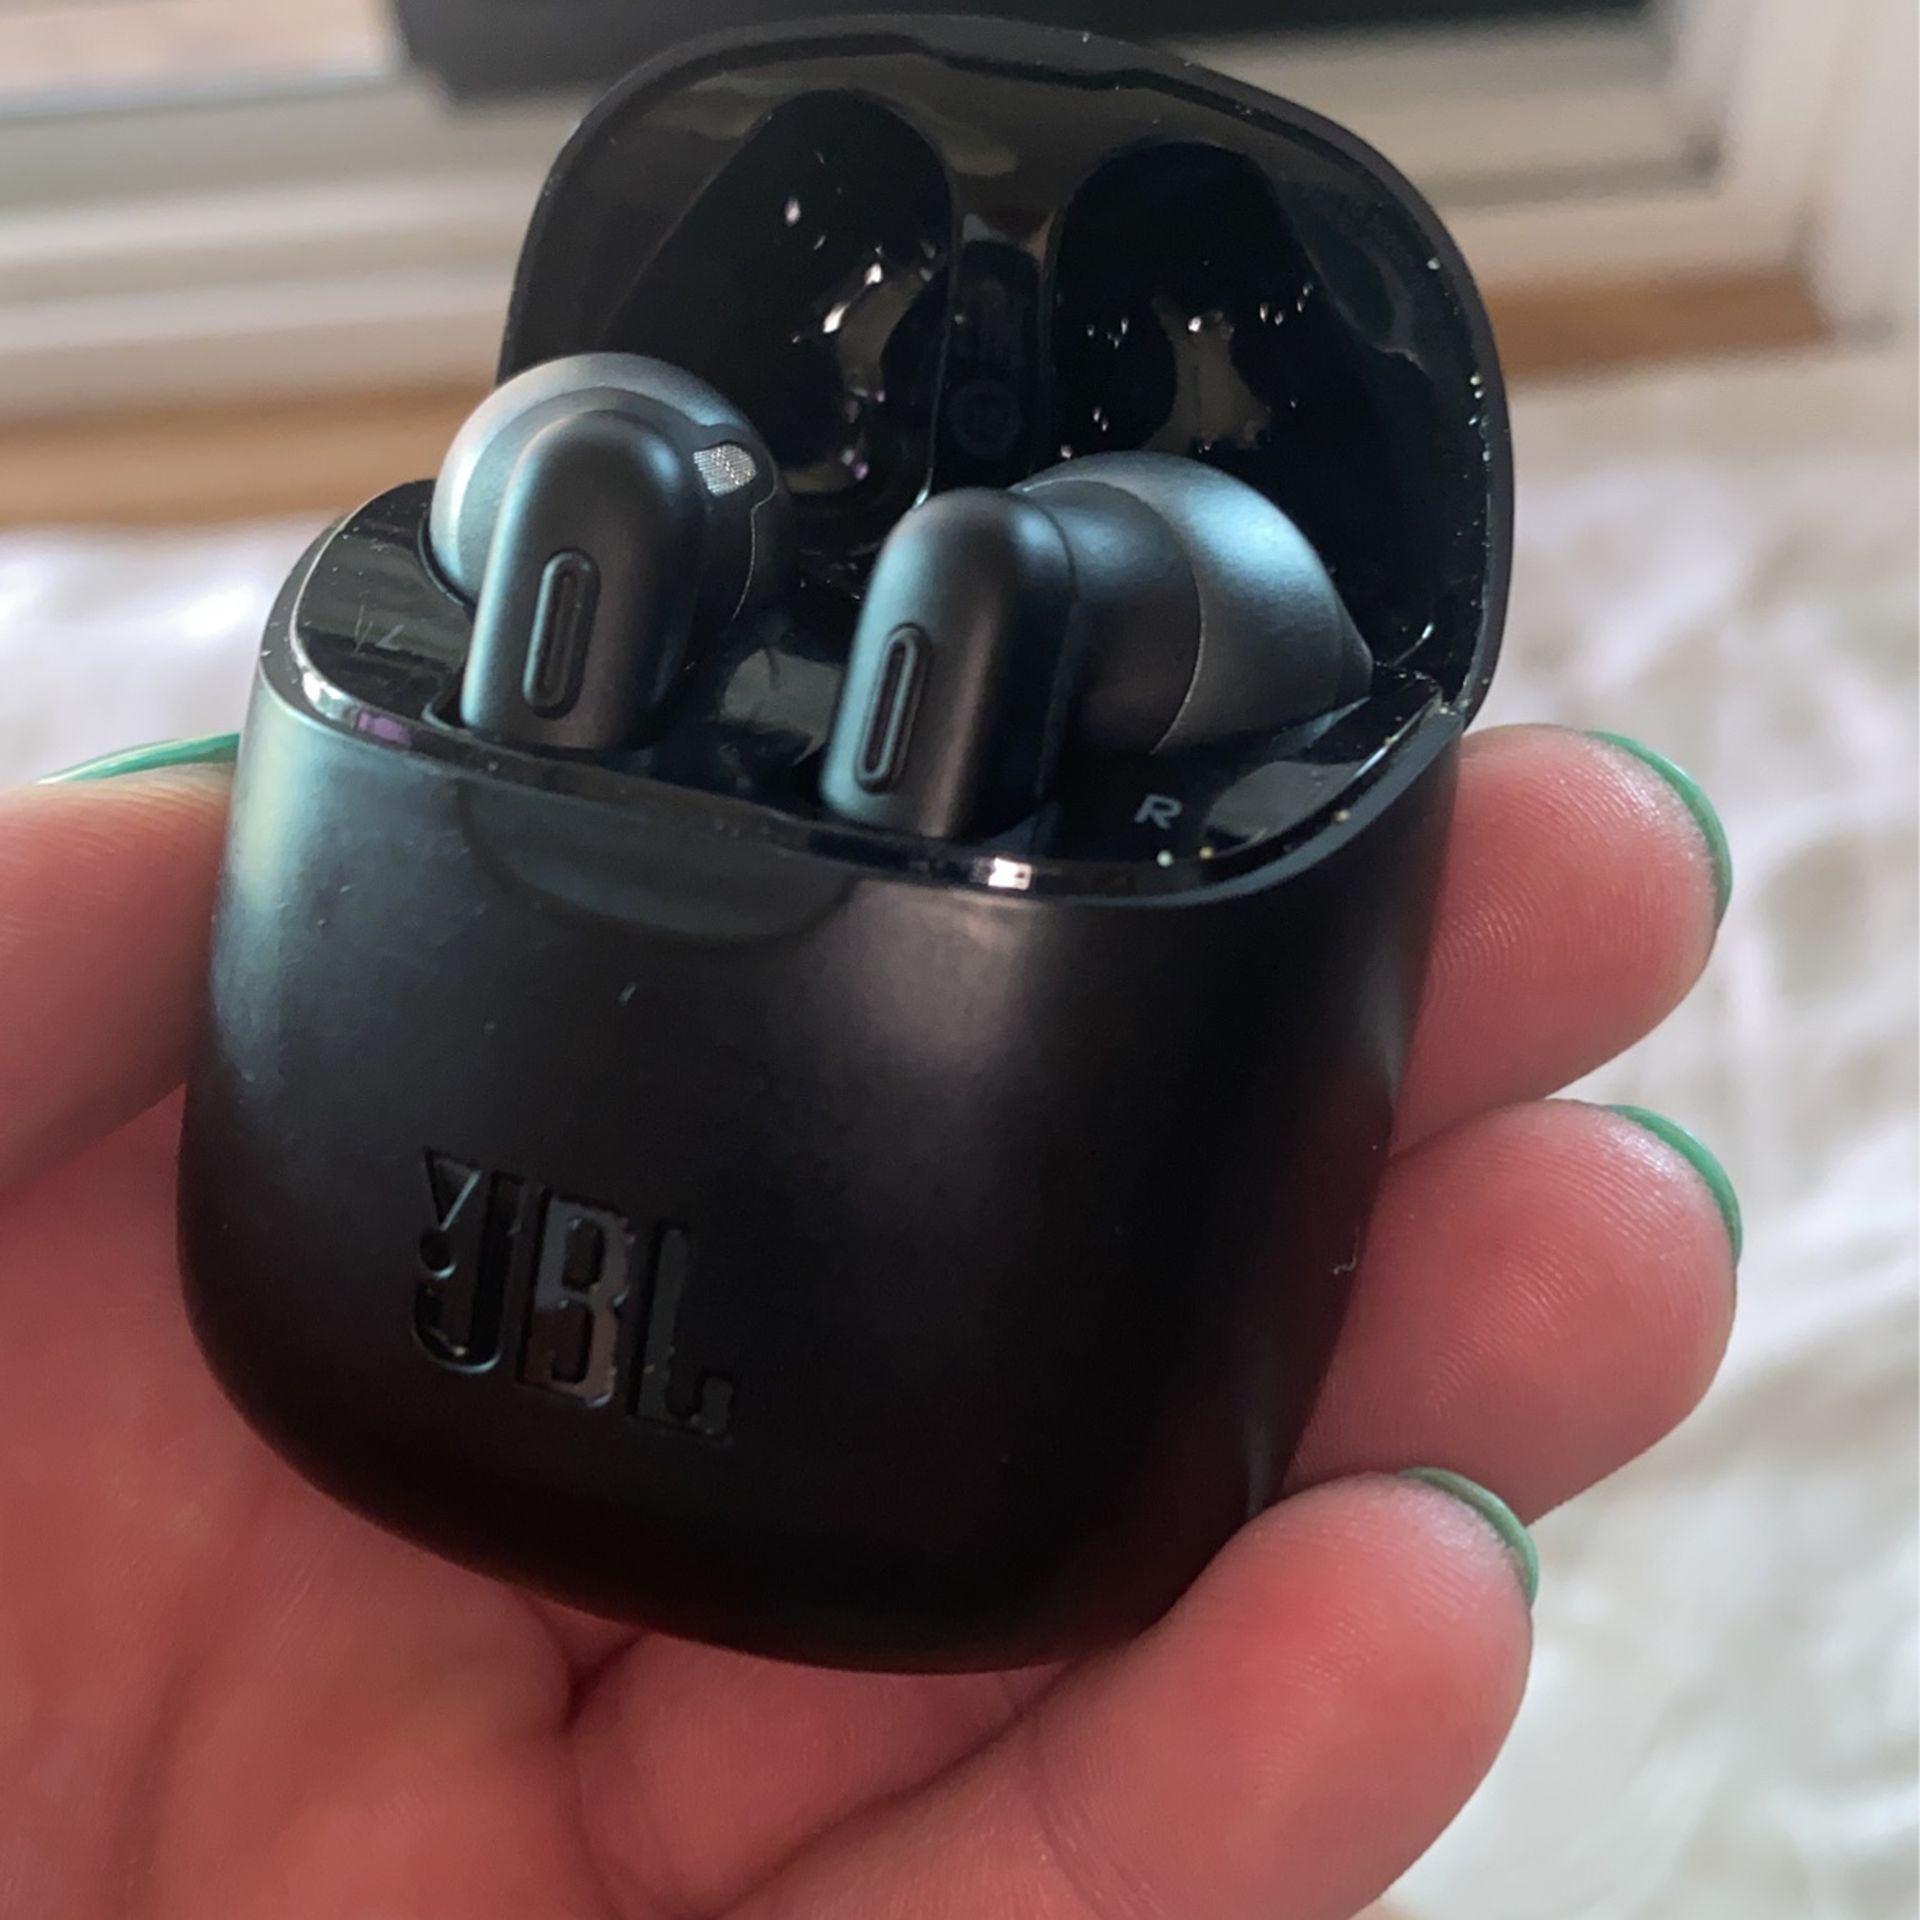 OPENED BOX, BUT NEVER USED! LIKE BRAND NEW! JBL Bluetooth Sweat-proof In-ear Ear Buds W/ Charging/rechargeable  Case